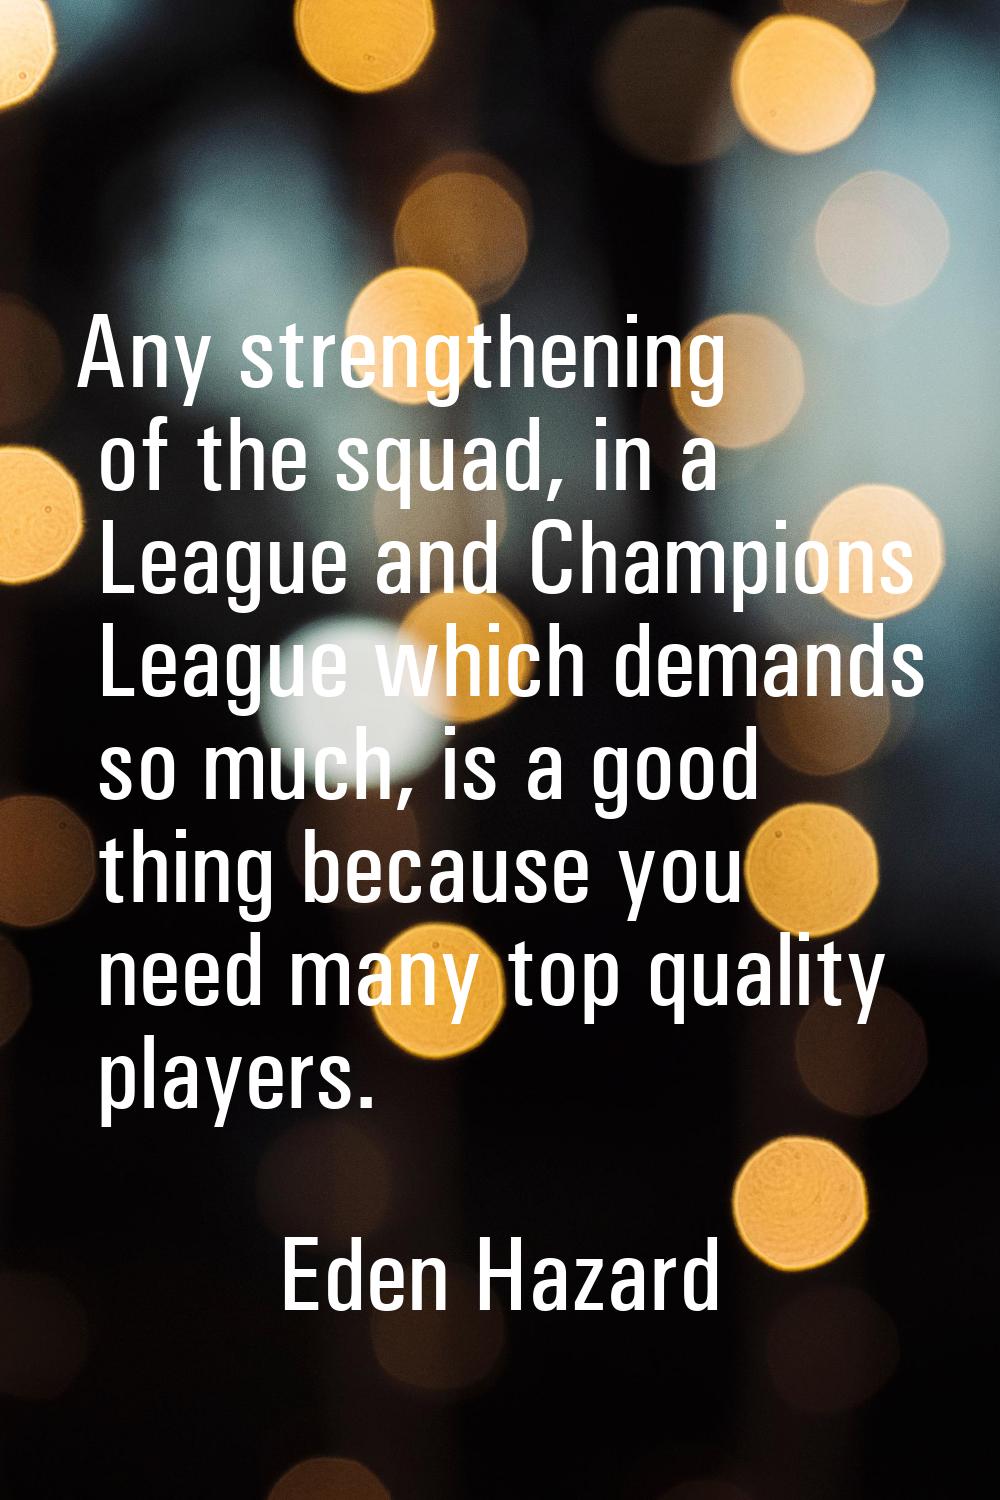 Any strengthening of the squad, in a League and Champions League which demands so much, is a good t